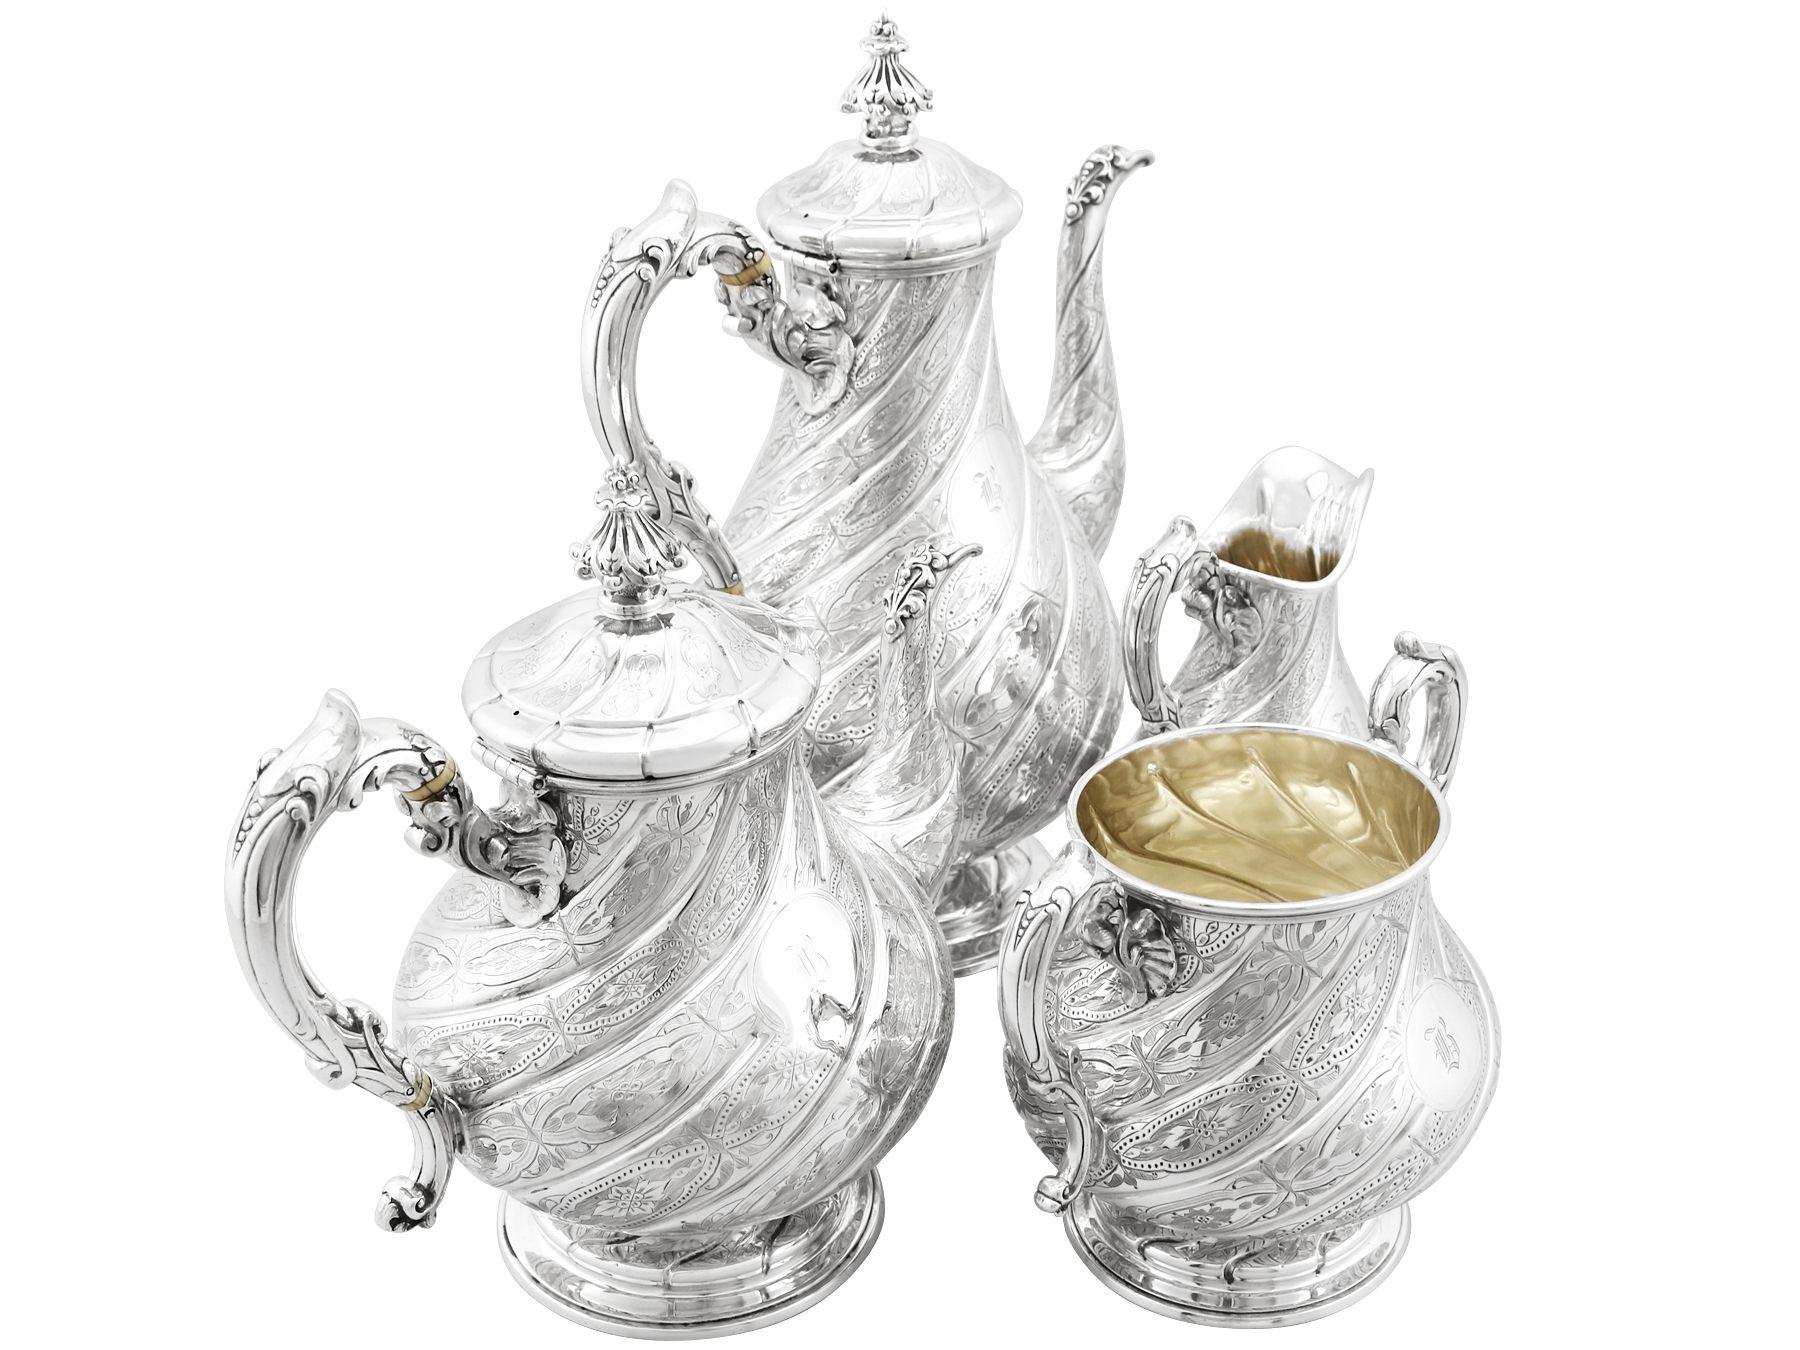 An exceptional, fine and impressive, composite antique Victorian English sterling silver four-piece tea and coffee service/set; part of our silver teaware collection.

This exceptional antique Victorian four-piece sterling silver tea and coffee